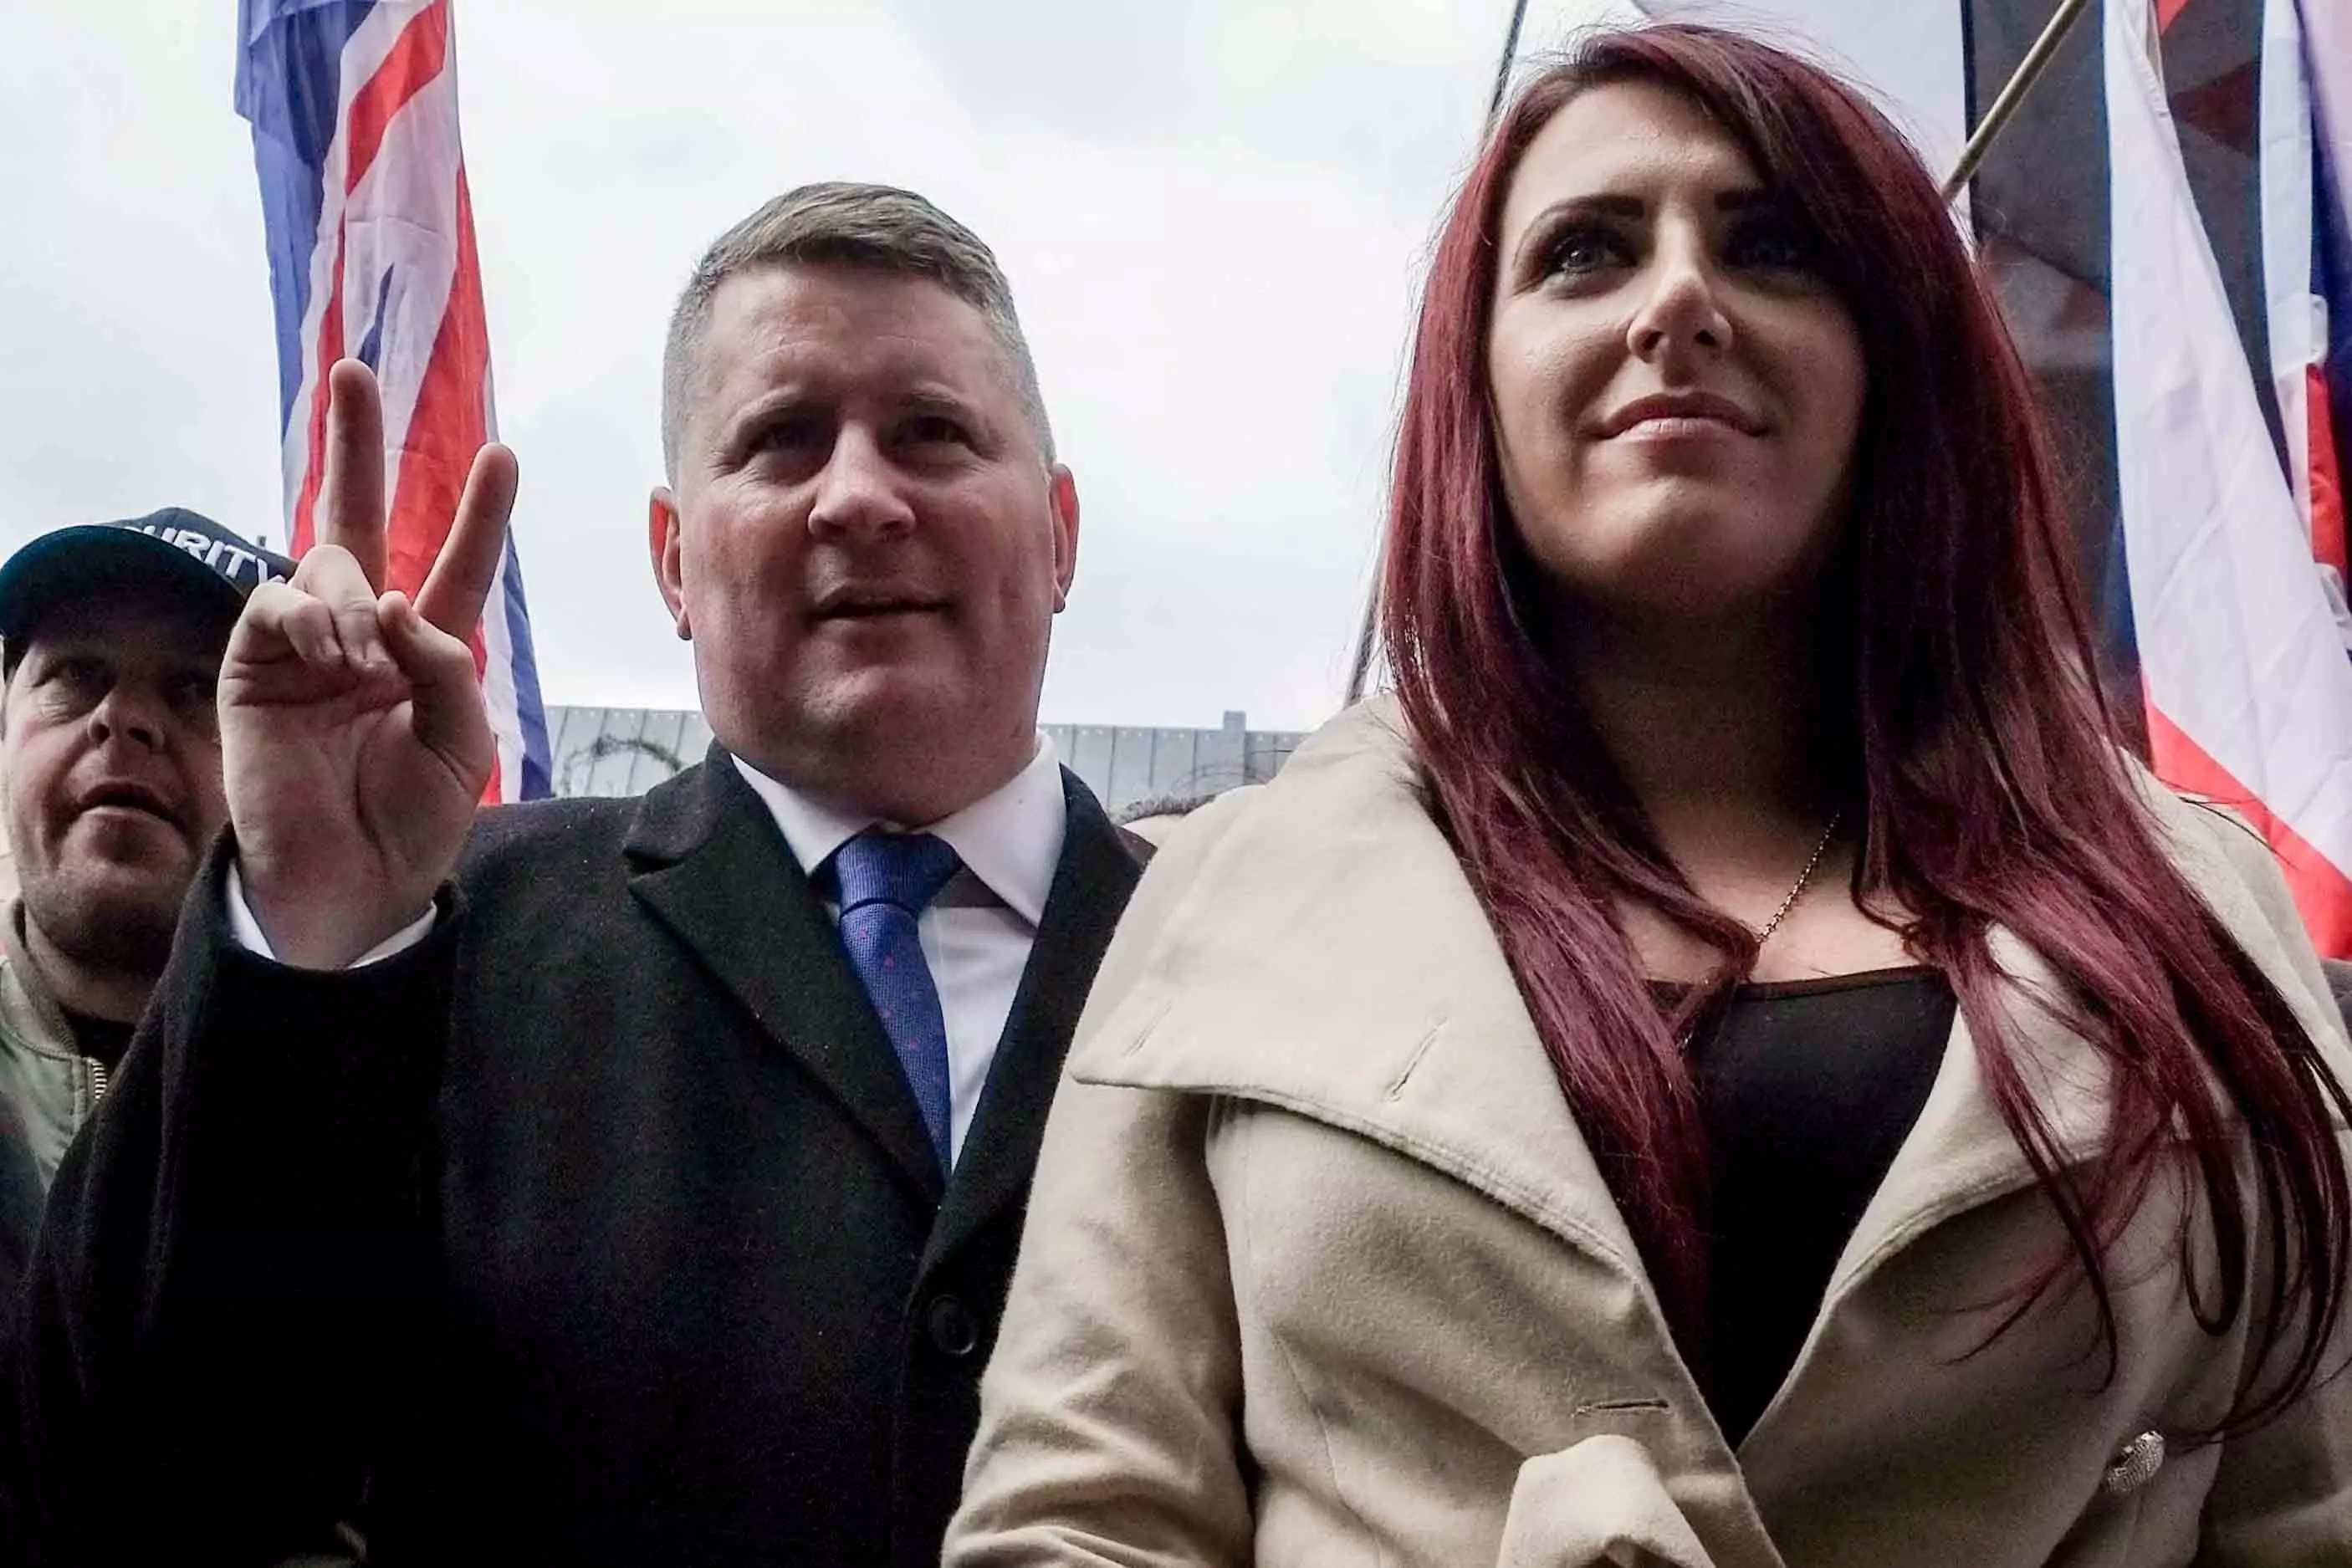 Britain First leaders allegedly told Richard not to talk to Prevent.